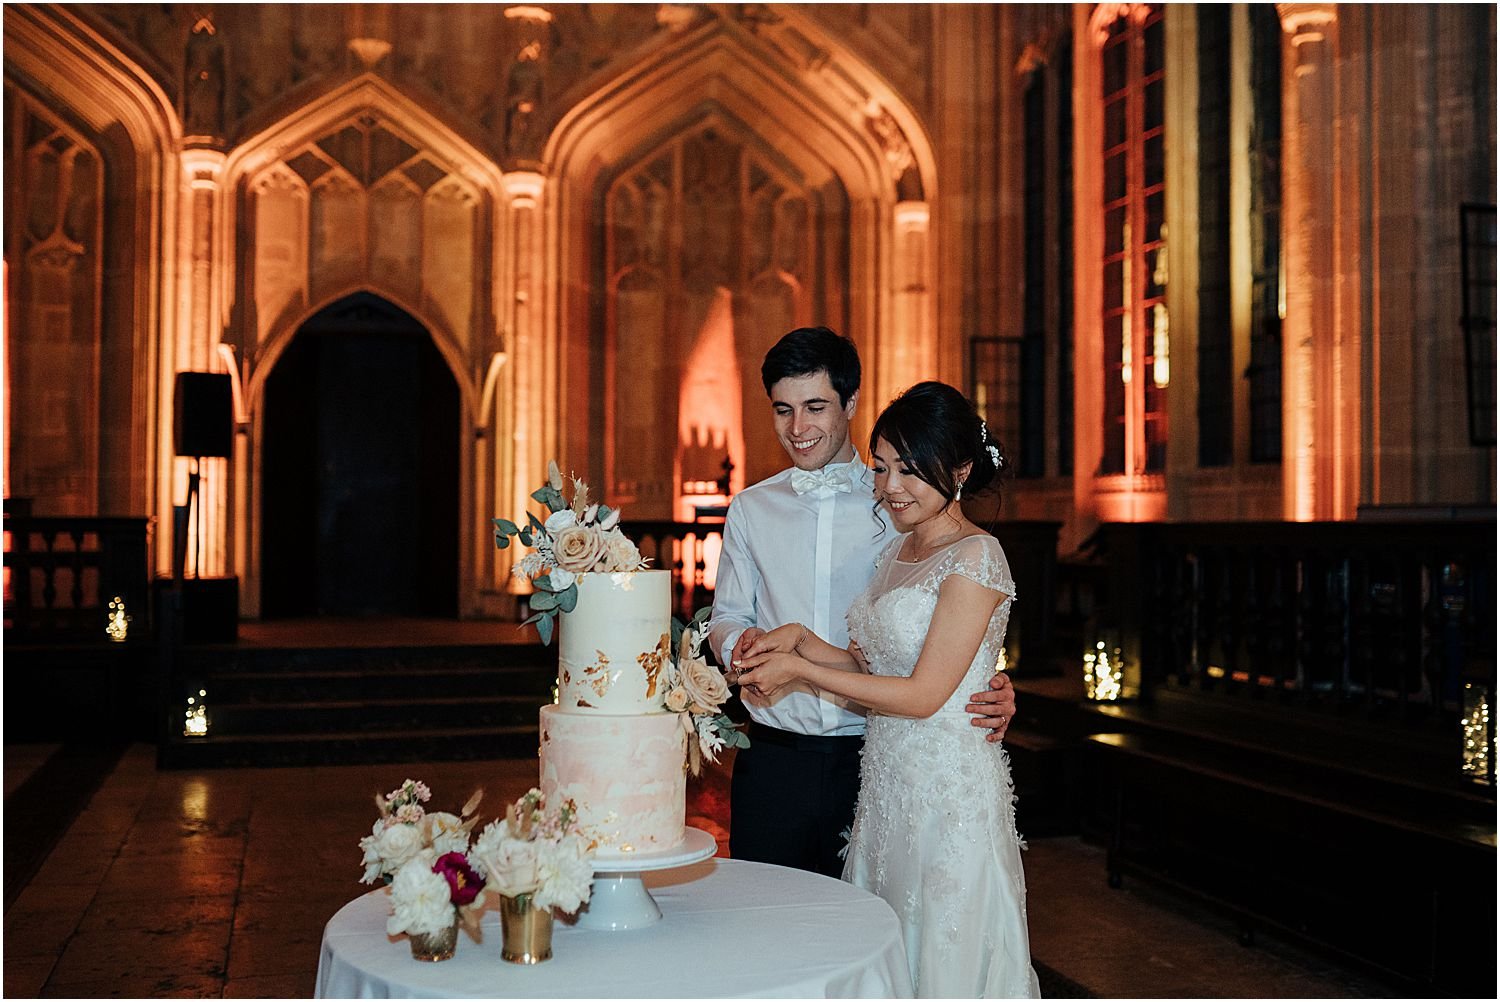 Bride and groom cutting cake in Divinity School Oxford